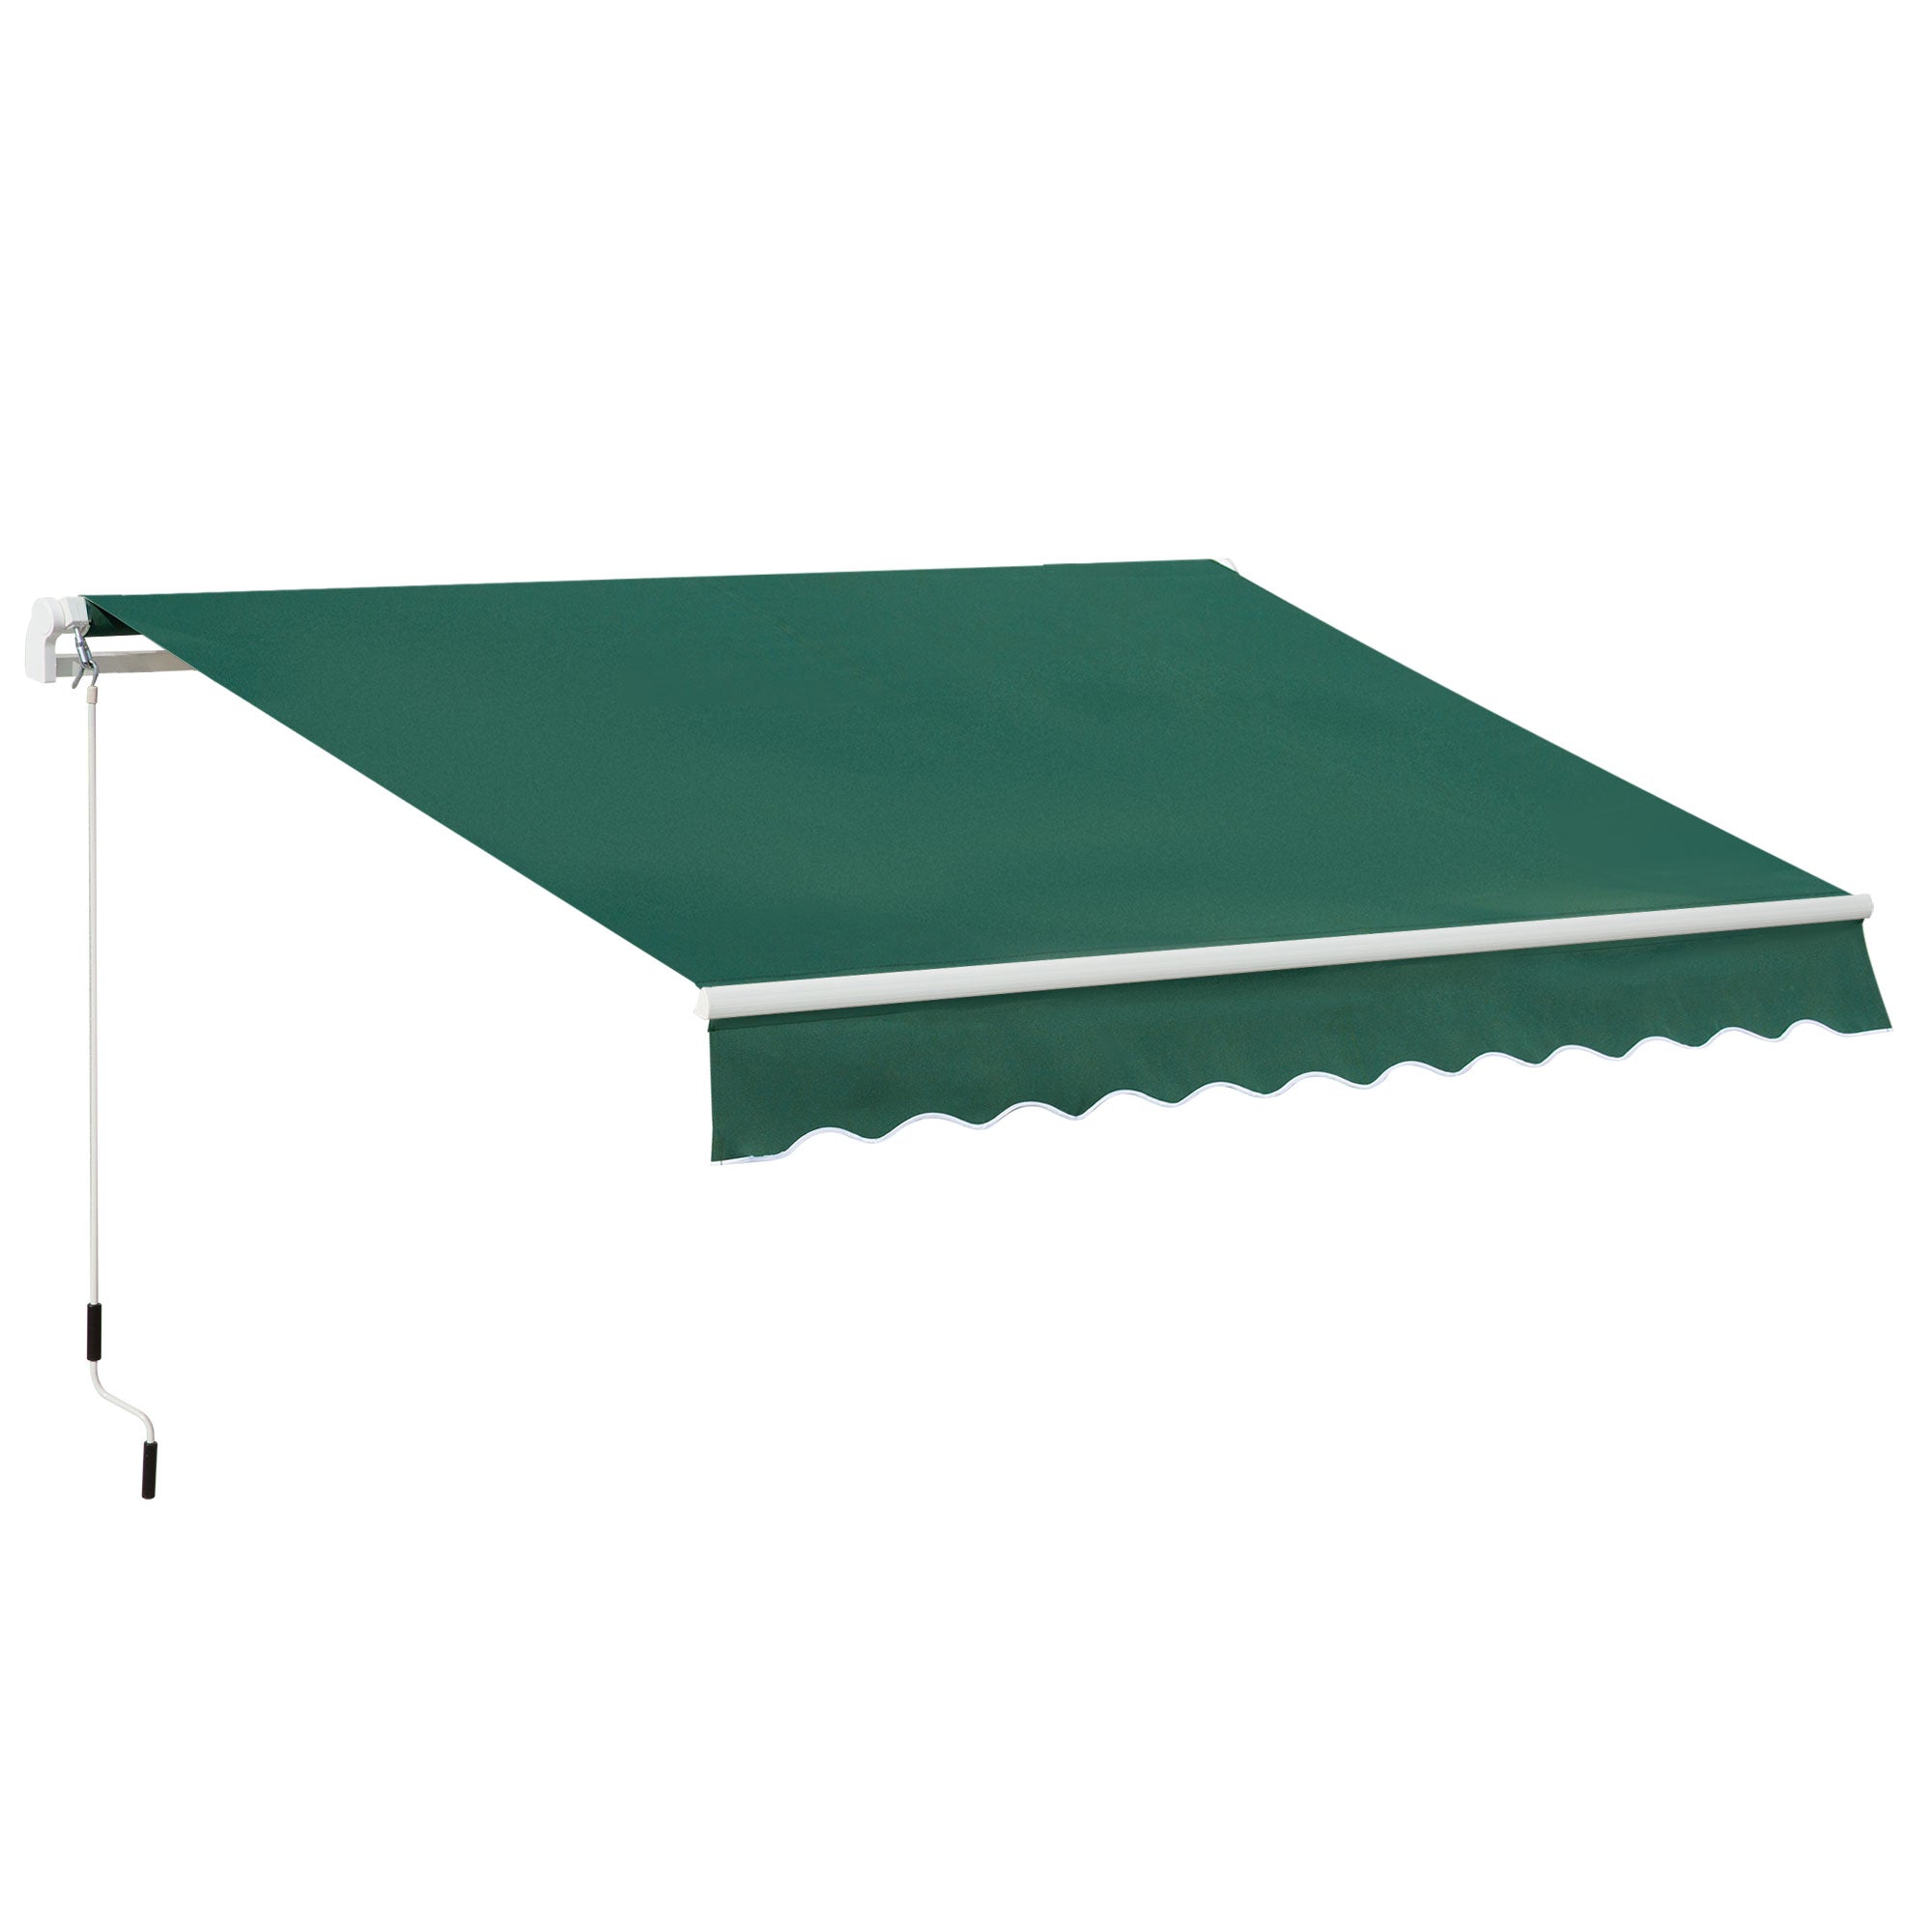 Outsunny Manual Retractable Awning Garden Shelter Canopy 3 x 2m Green  | TJ Hughes